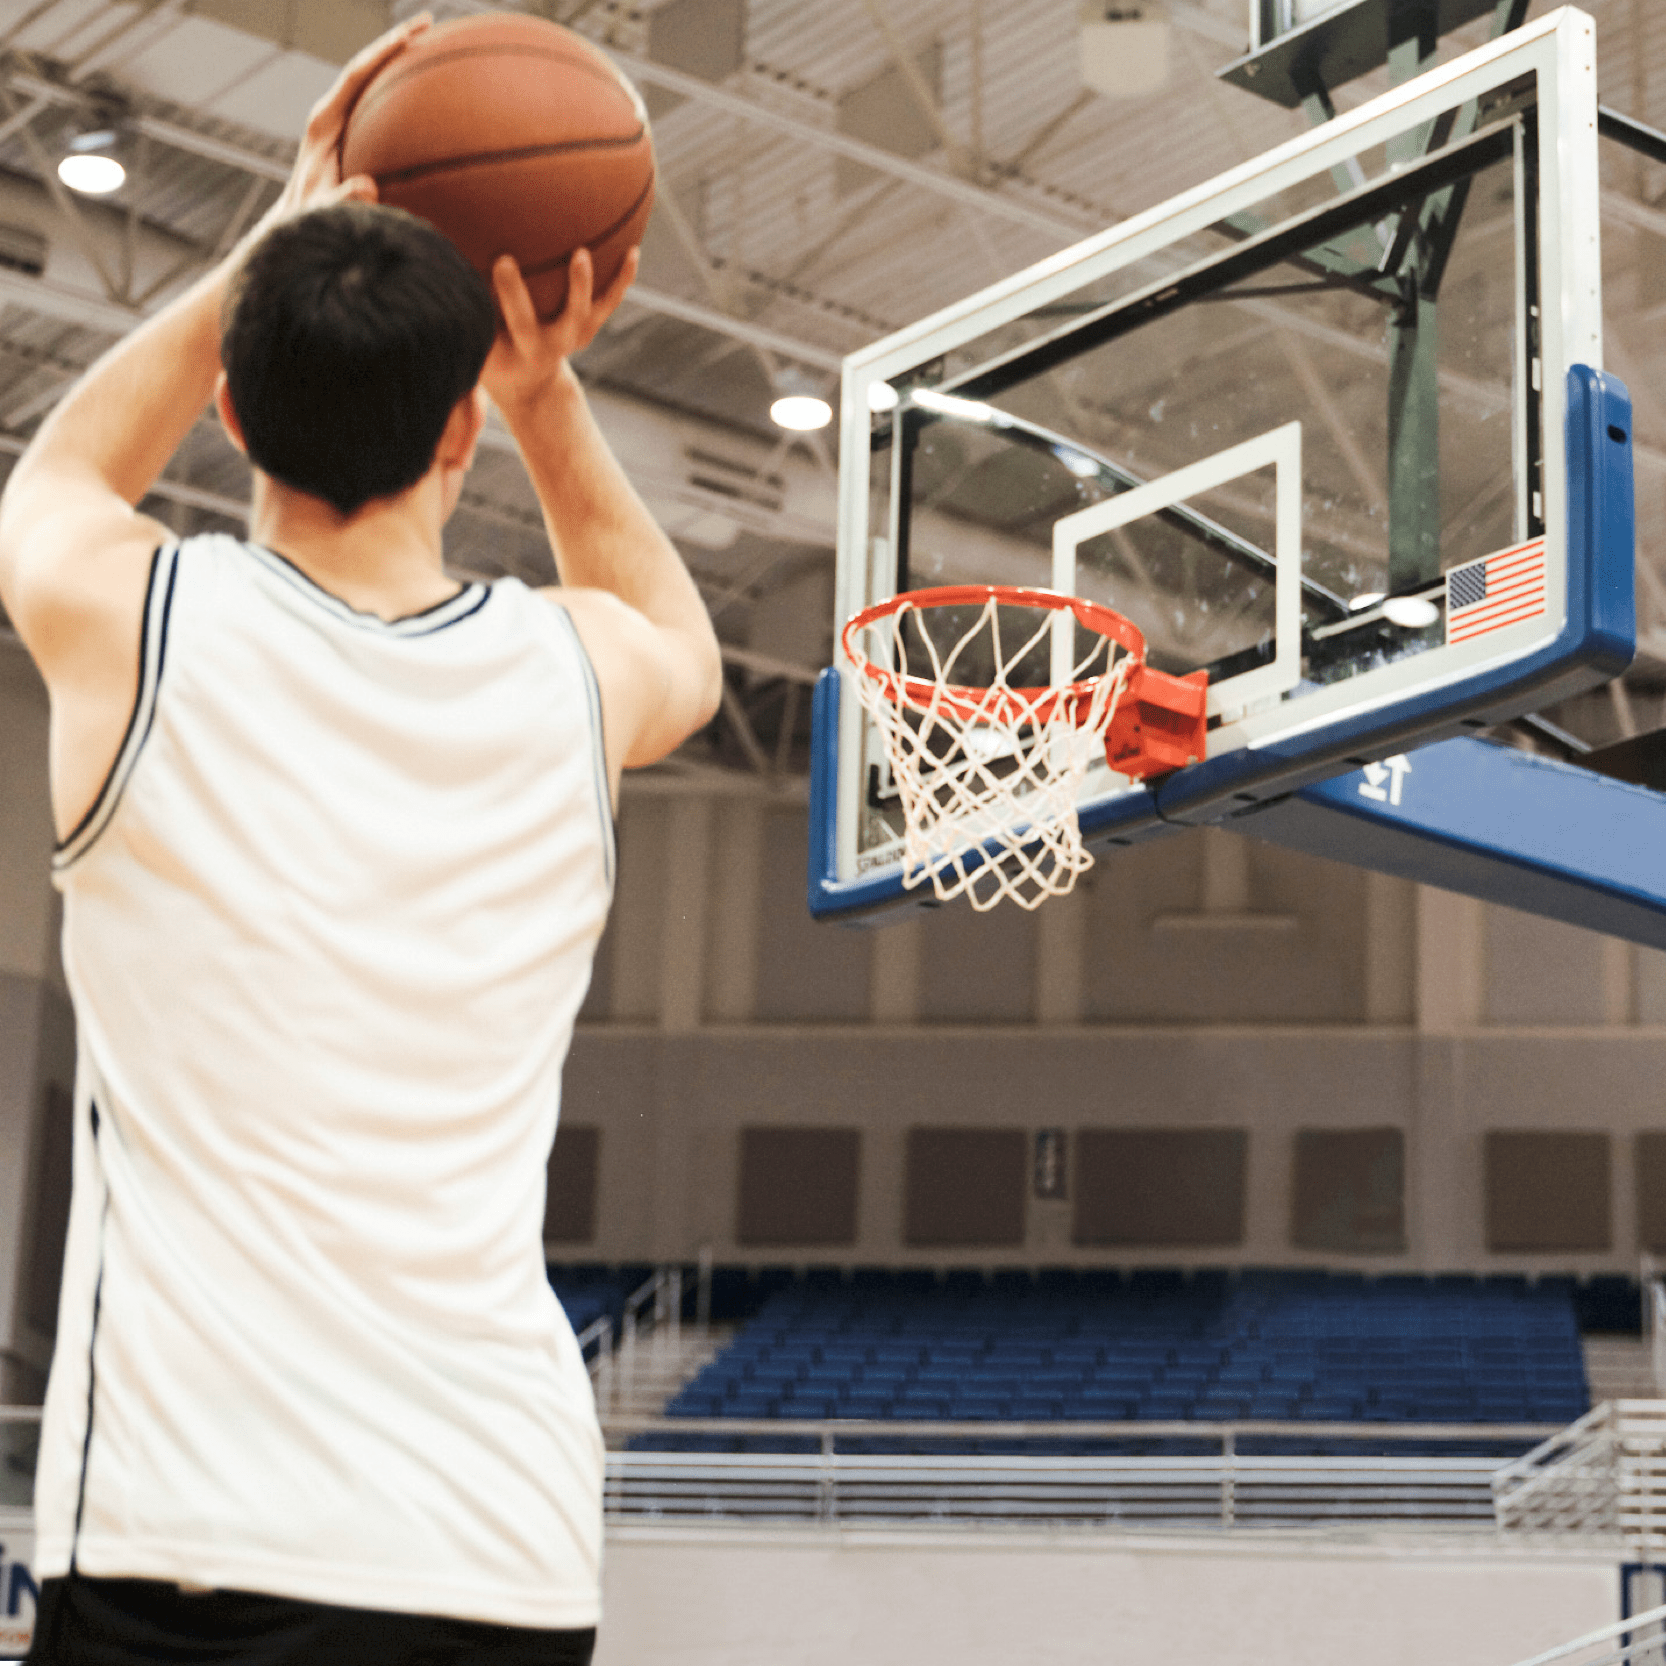 An athlete in a gym in front of a basketball hoop about to shoot a basketball at the hoop.